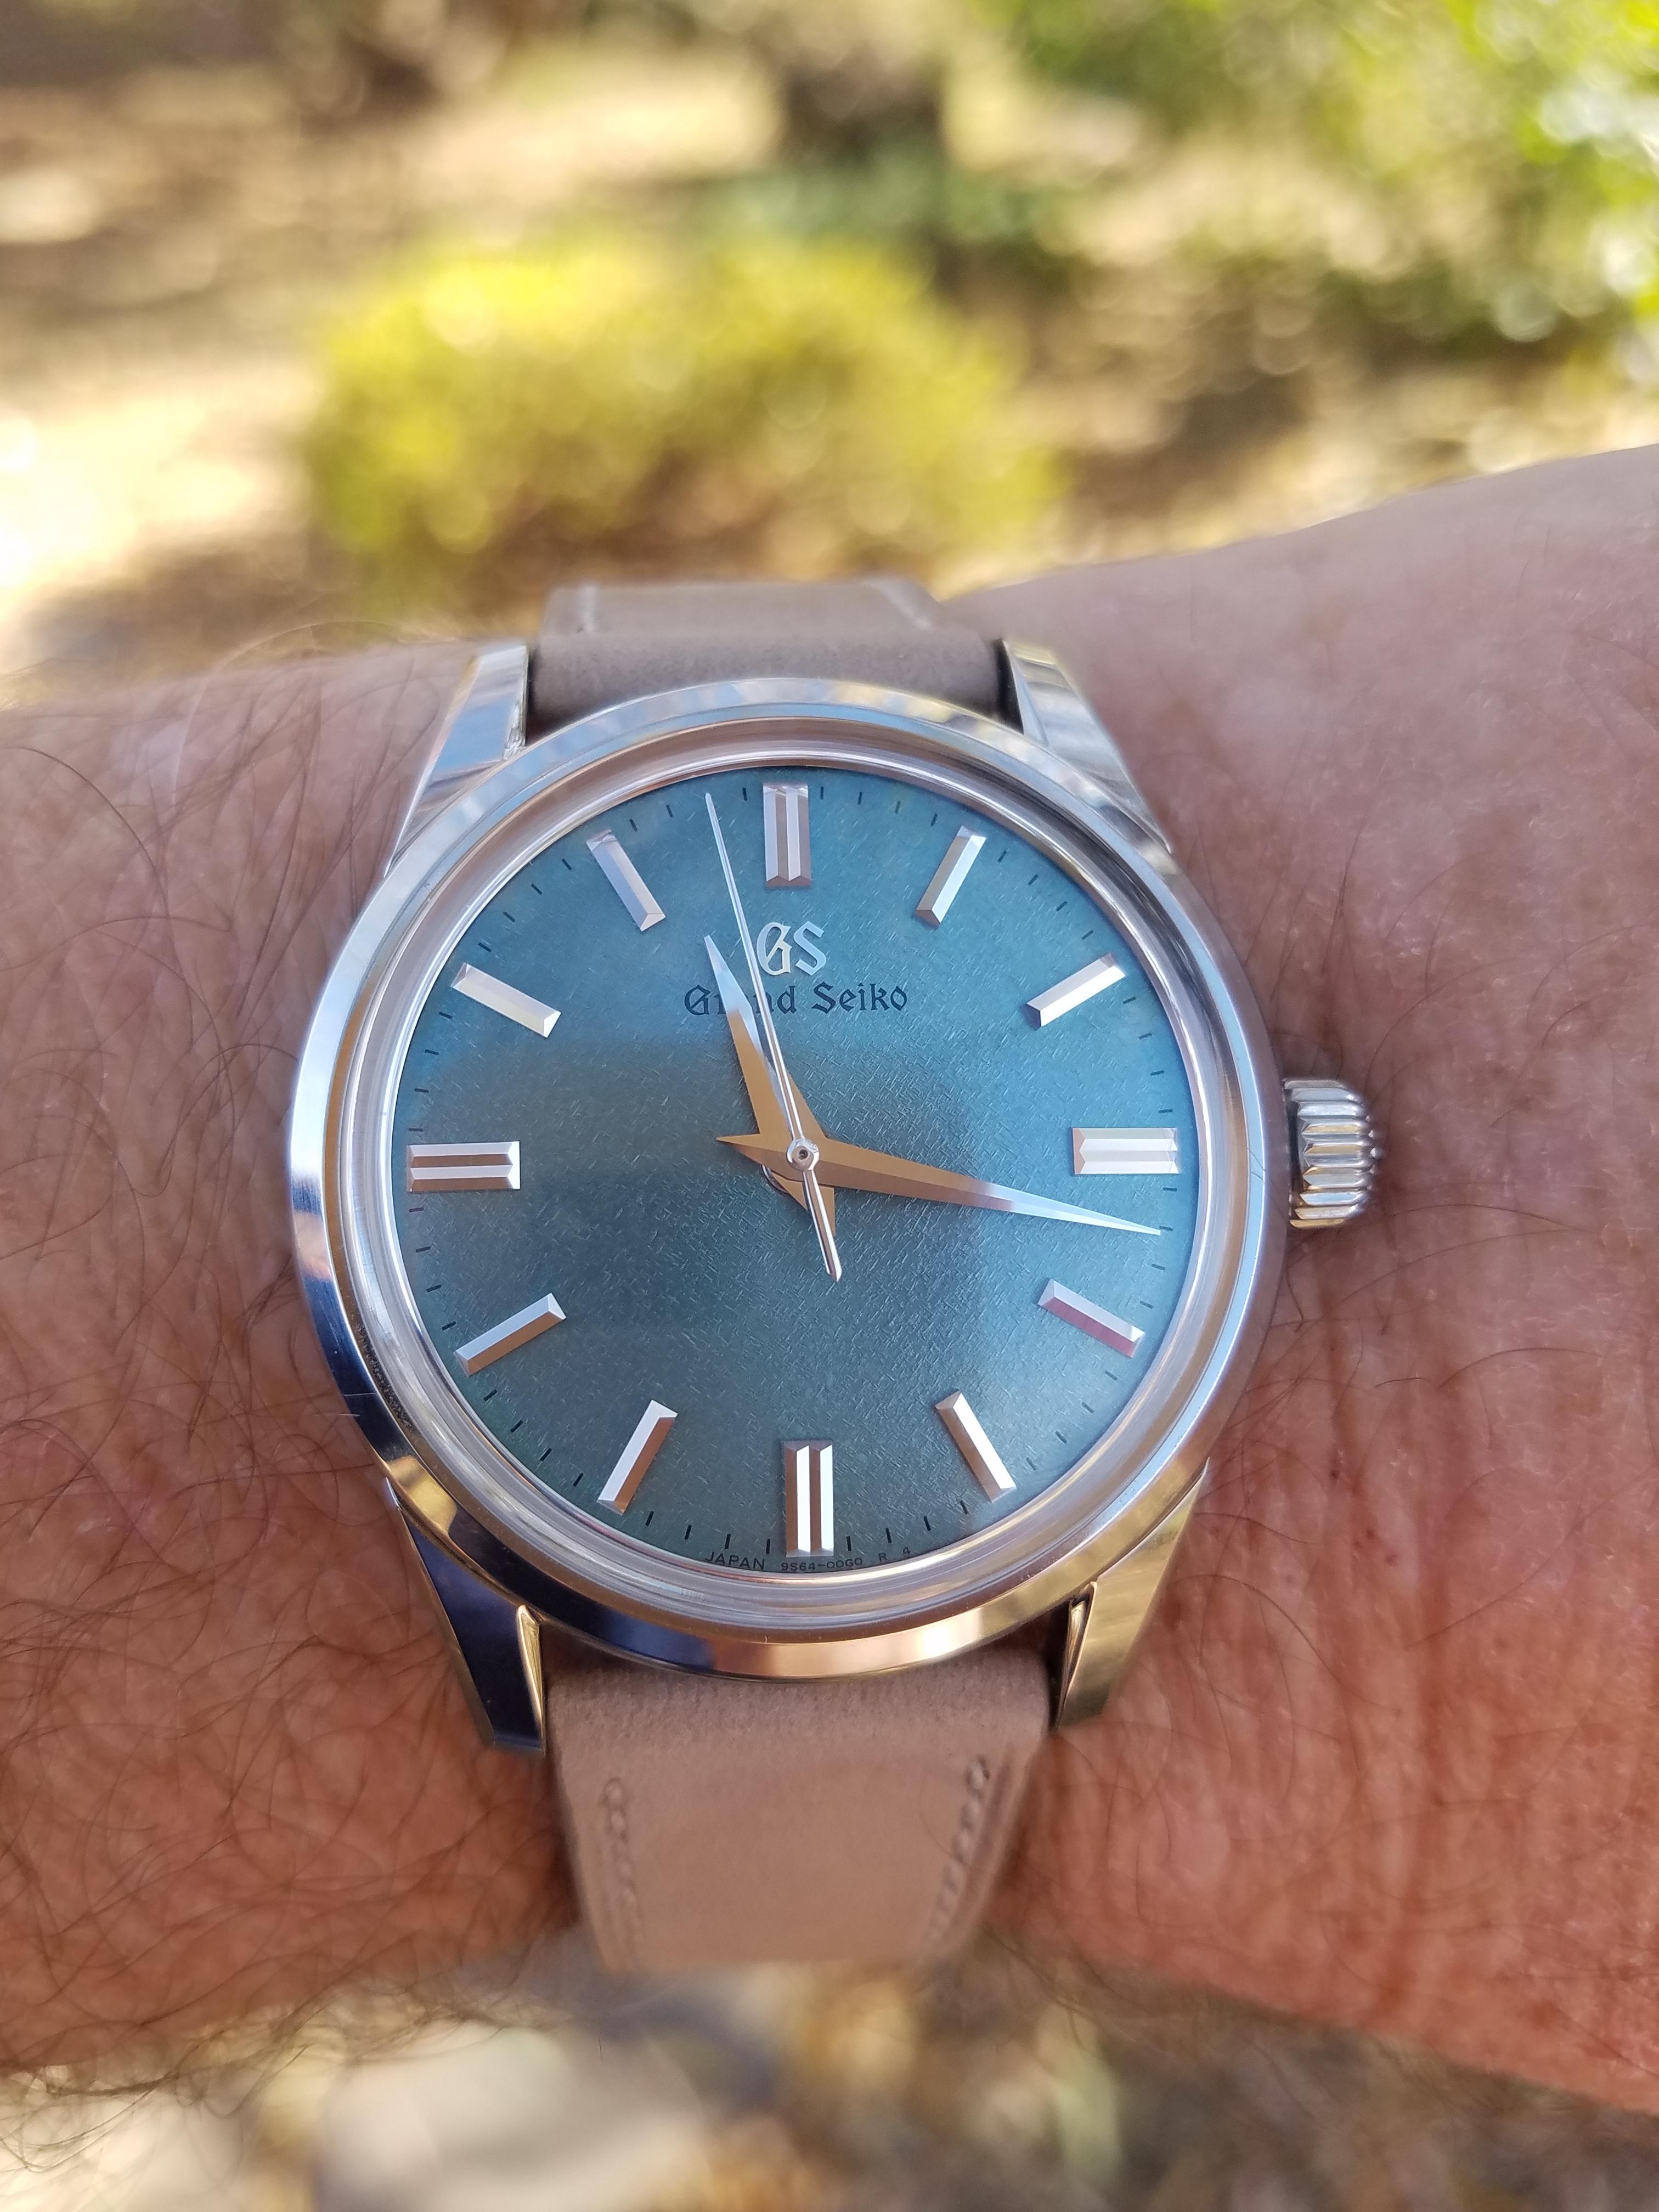 WTS] PRICE REDUCED - Grand Seiko SBGW275 Limited Edition 140pcs |  WatchCharts